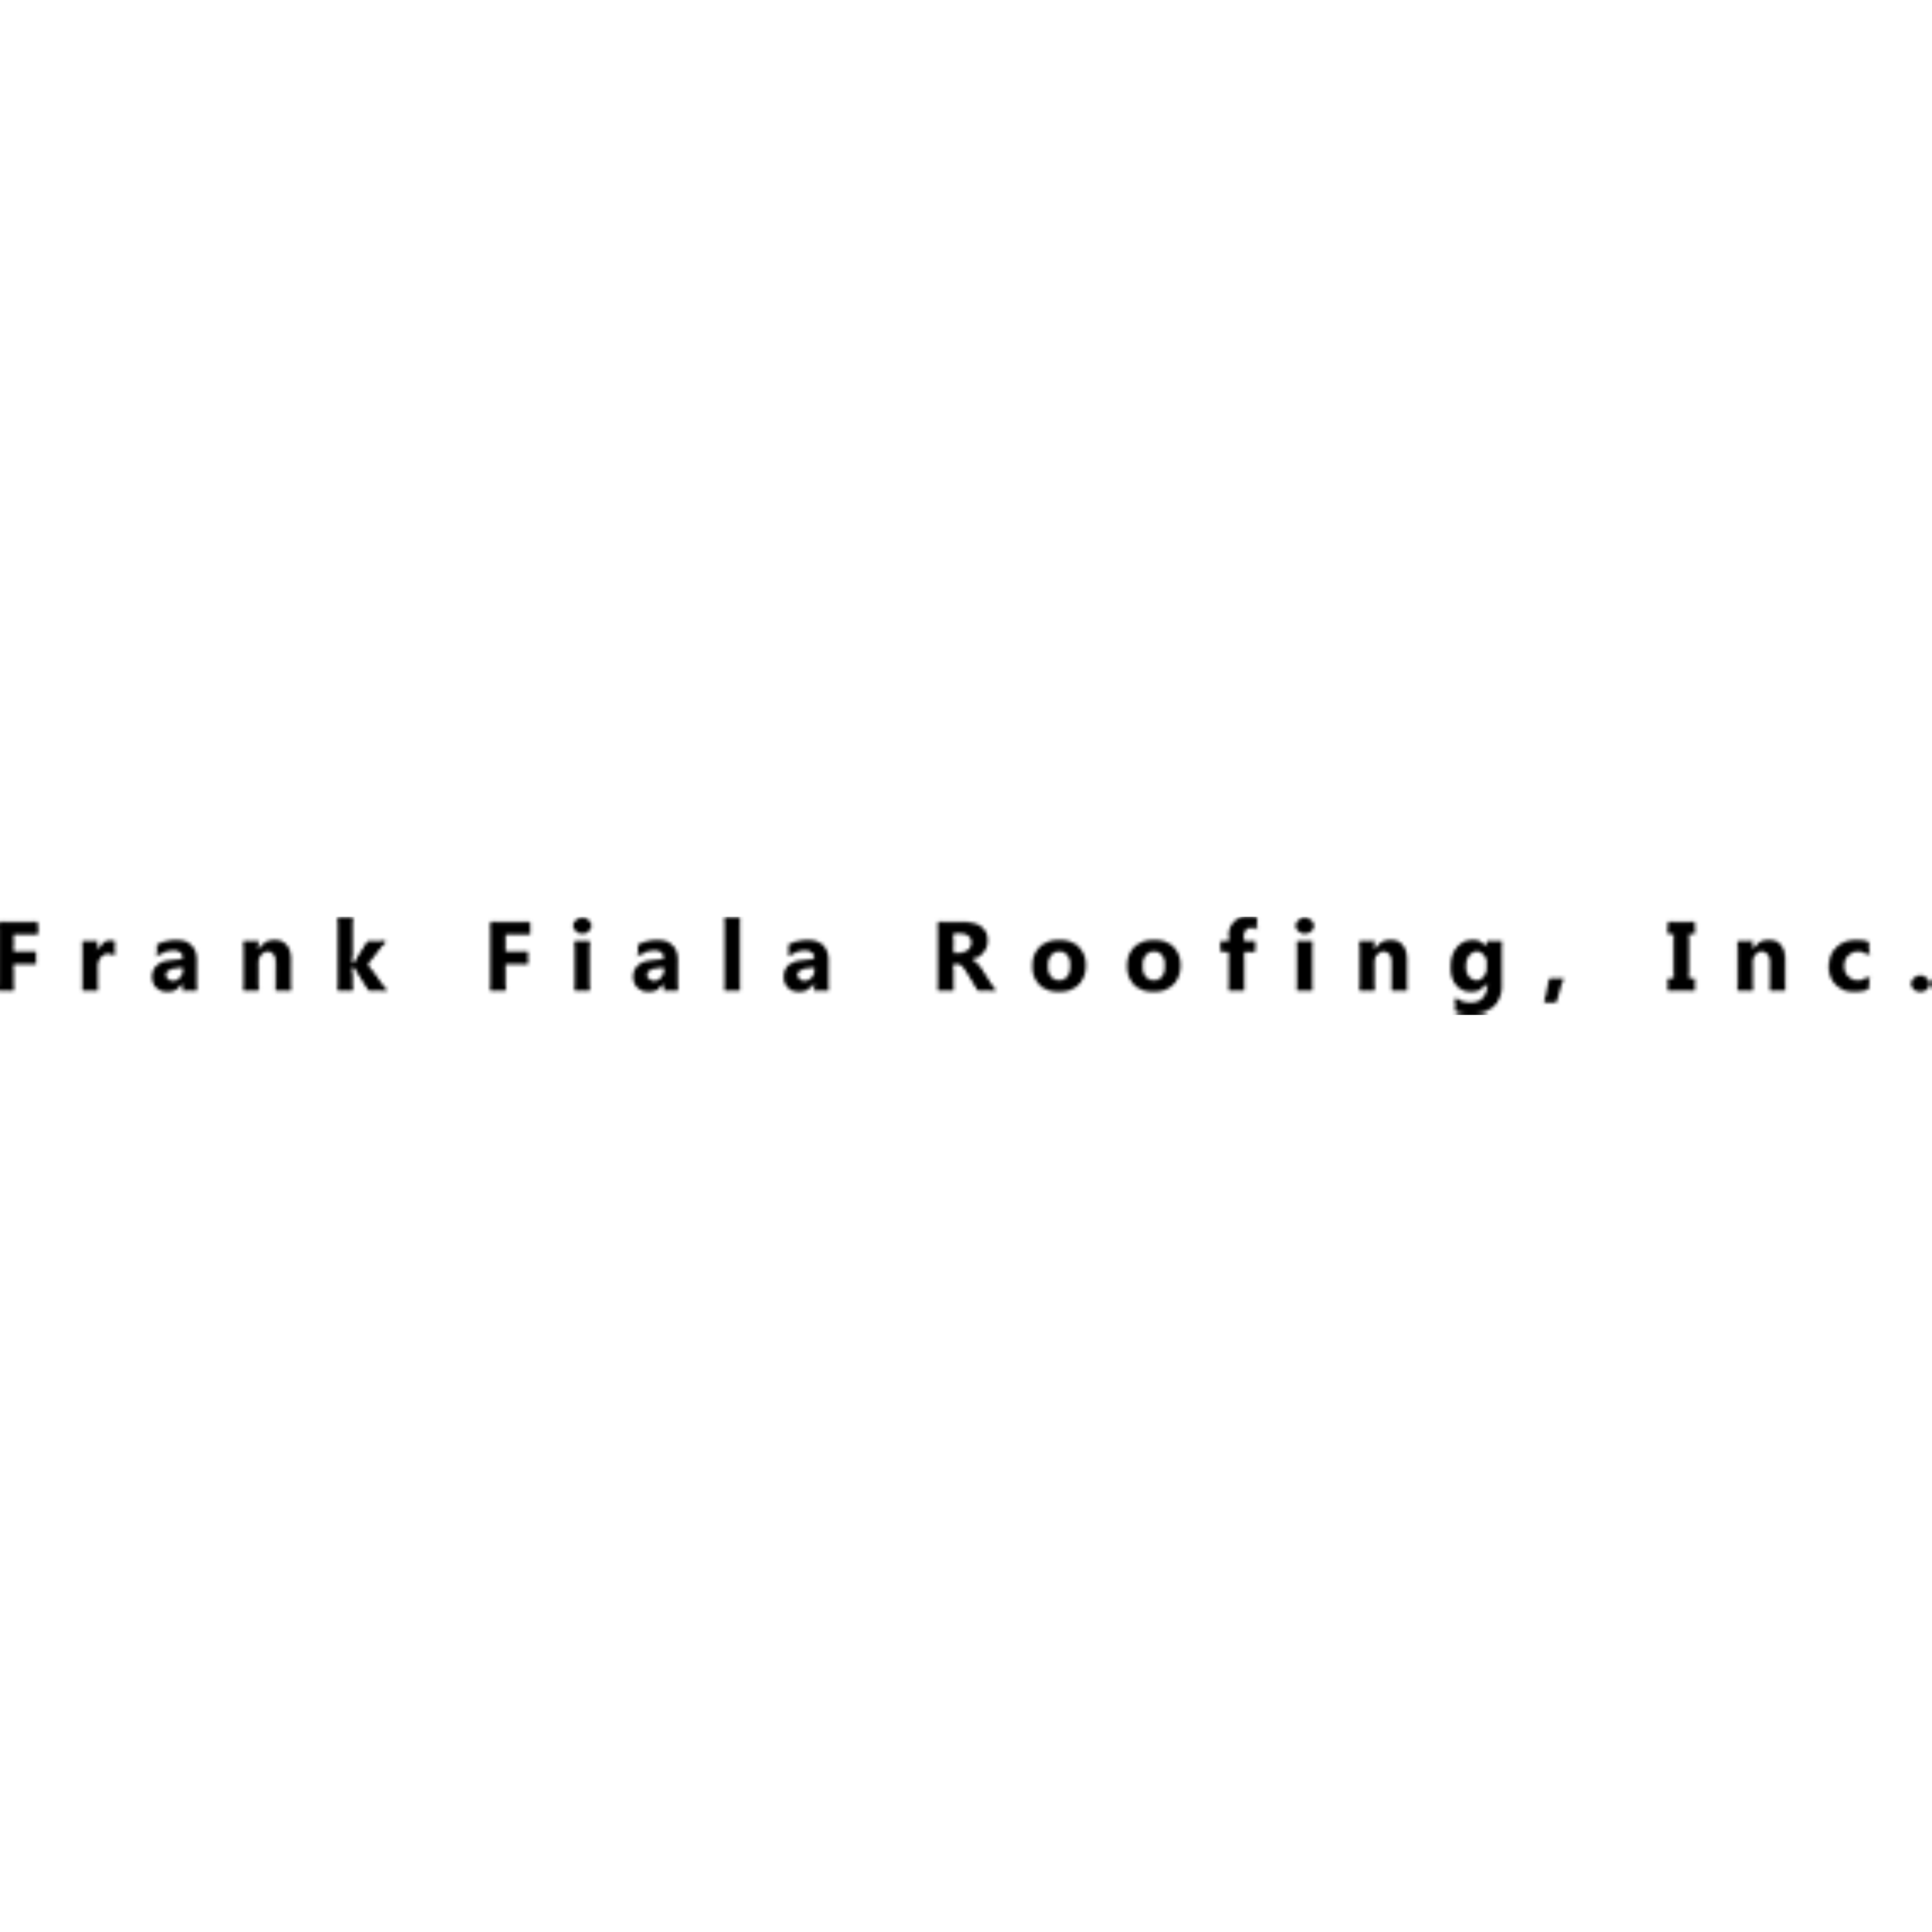 Frank Fiala Roofing